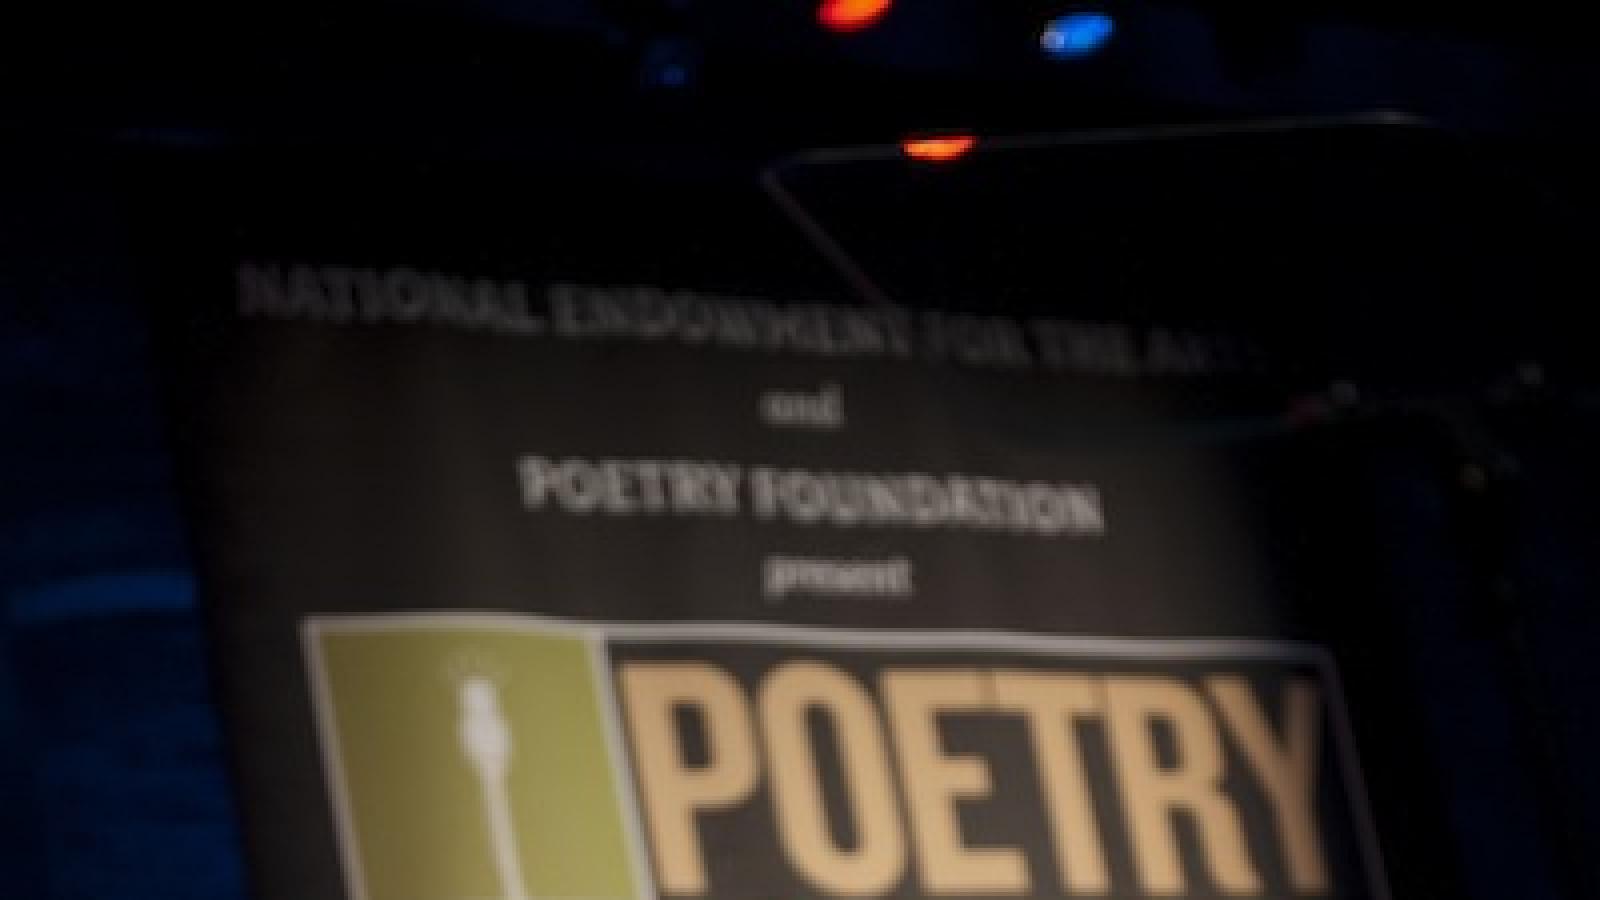 Actress Kerry Washington emcees the Poetry Out Loud National Finals